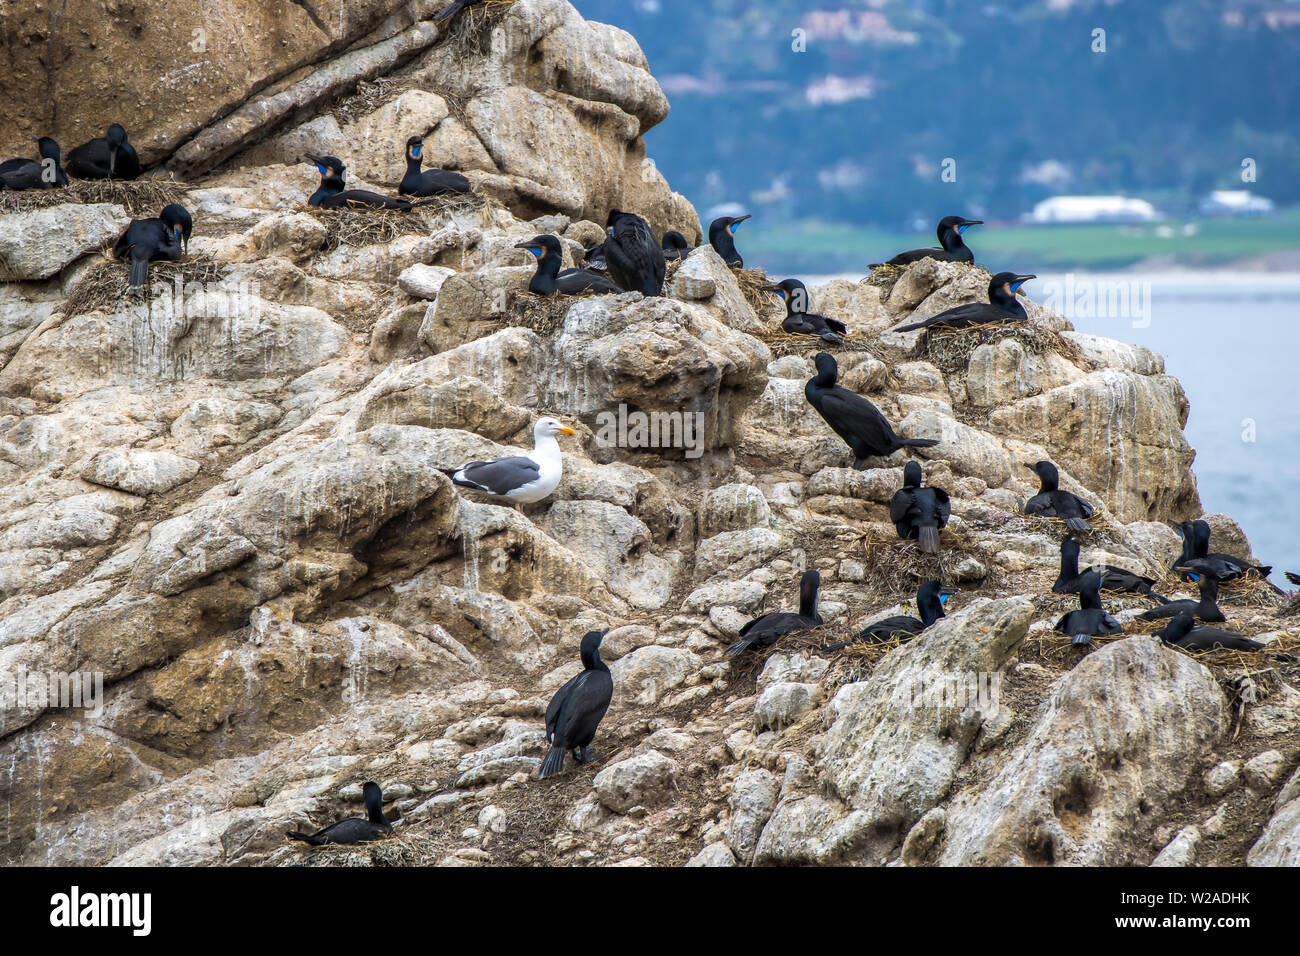 Single sea gull standing among colony of Brandt’s Cormorant sea birds sitting on their nests off the coast of Monterey, California. Stock Photo